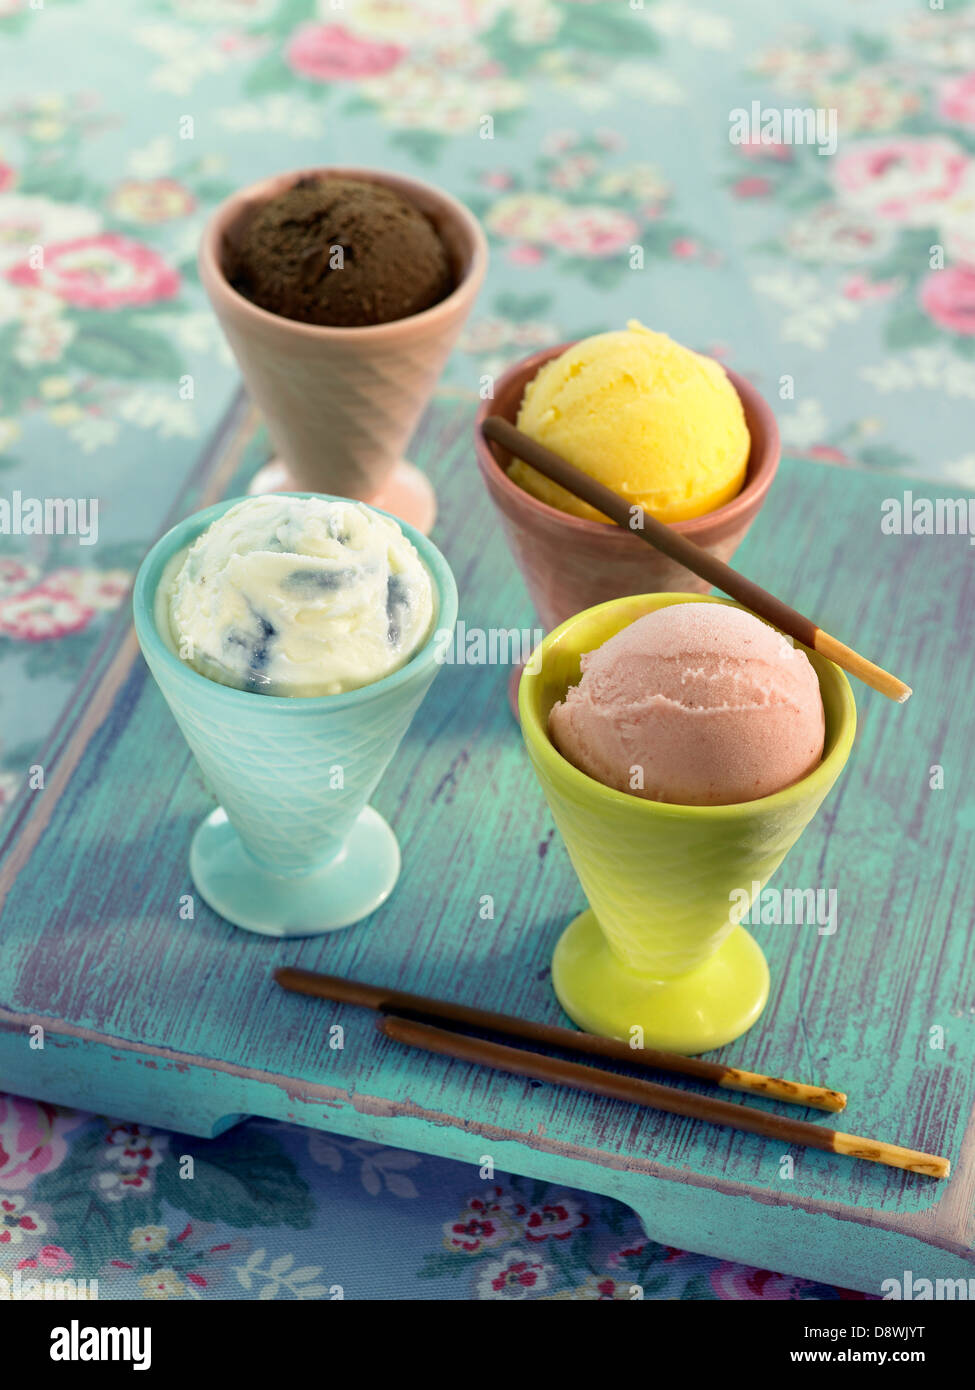 Different flavored scoops of ice cream Stock Photo